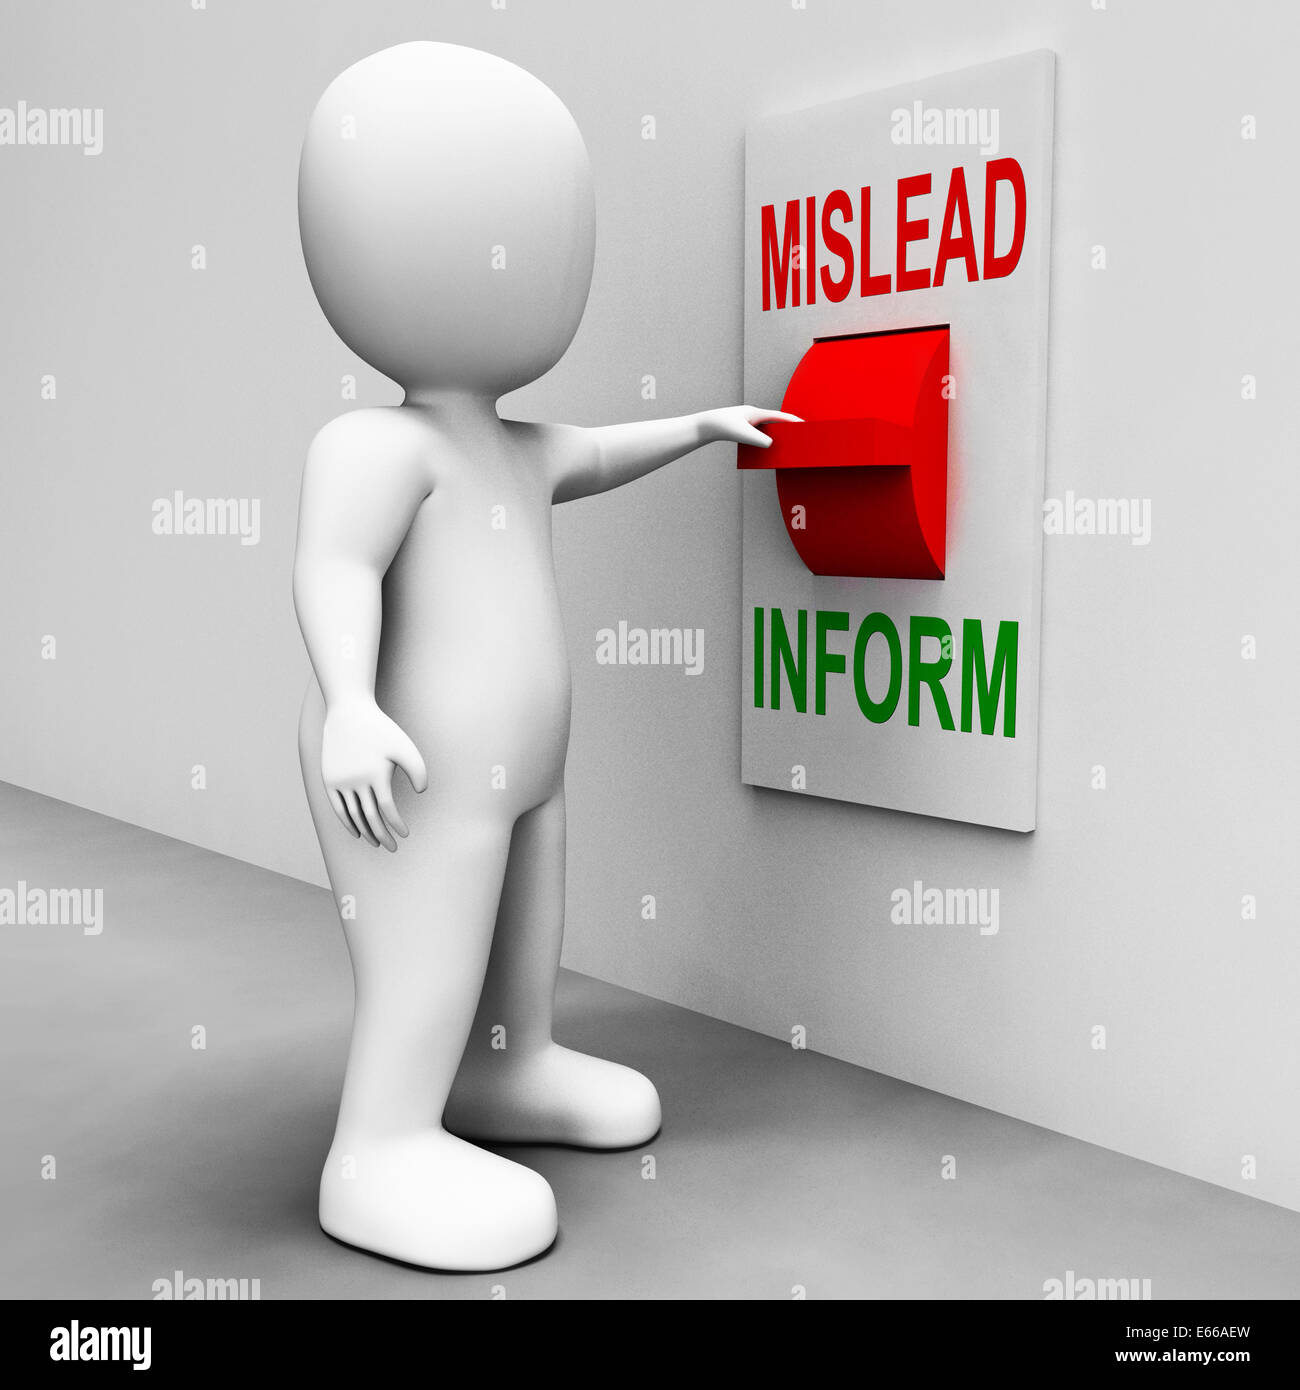 Mislead Inform Switch Showing Misleading Or Informative Advice Stock Photo